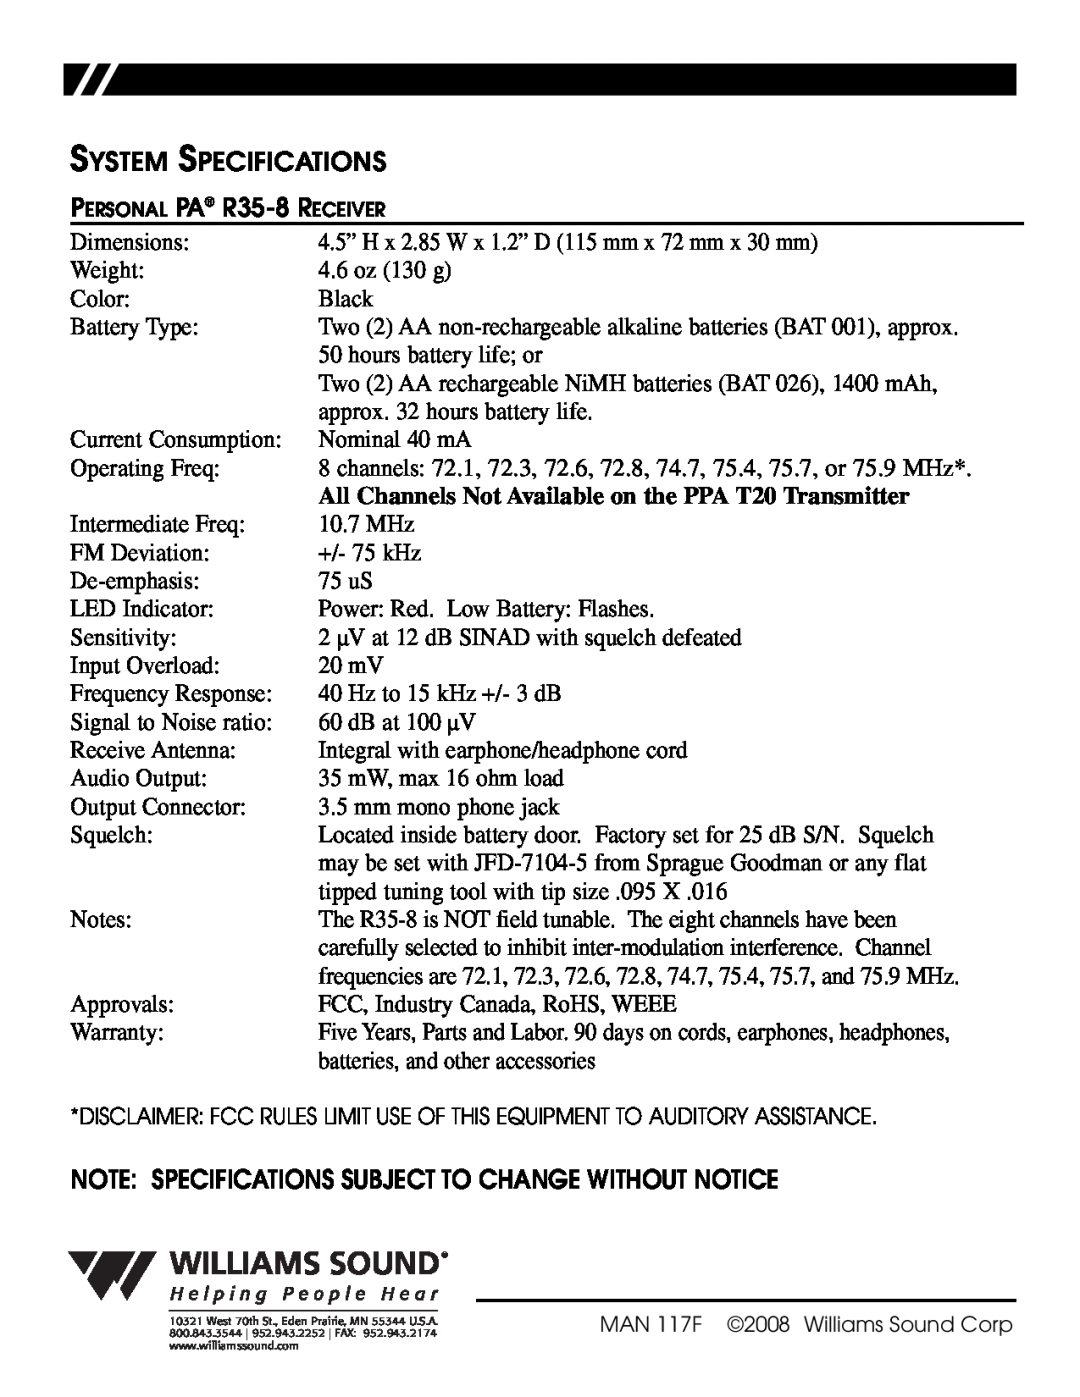 Williams Sound PPA R35-8 manual System Specifications, Note Specifications Subject To Change Without Notice 